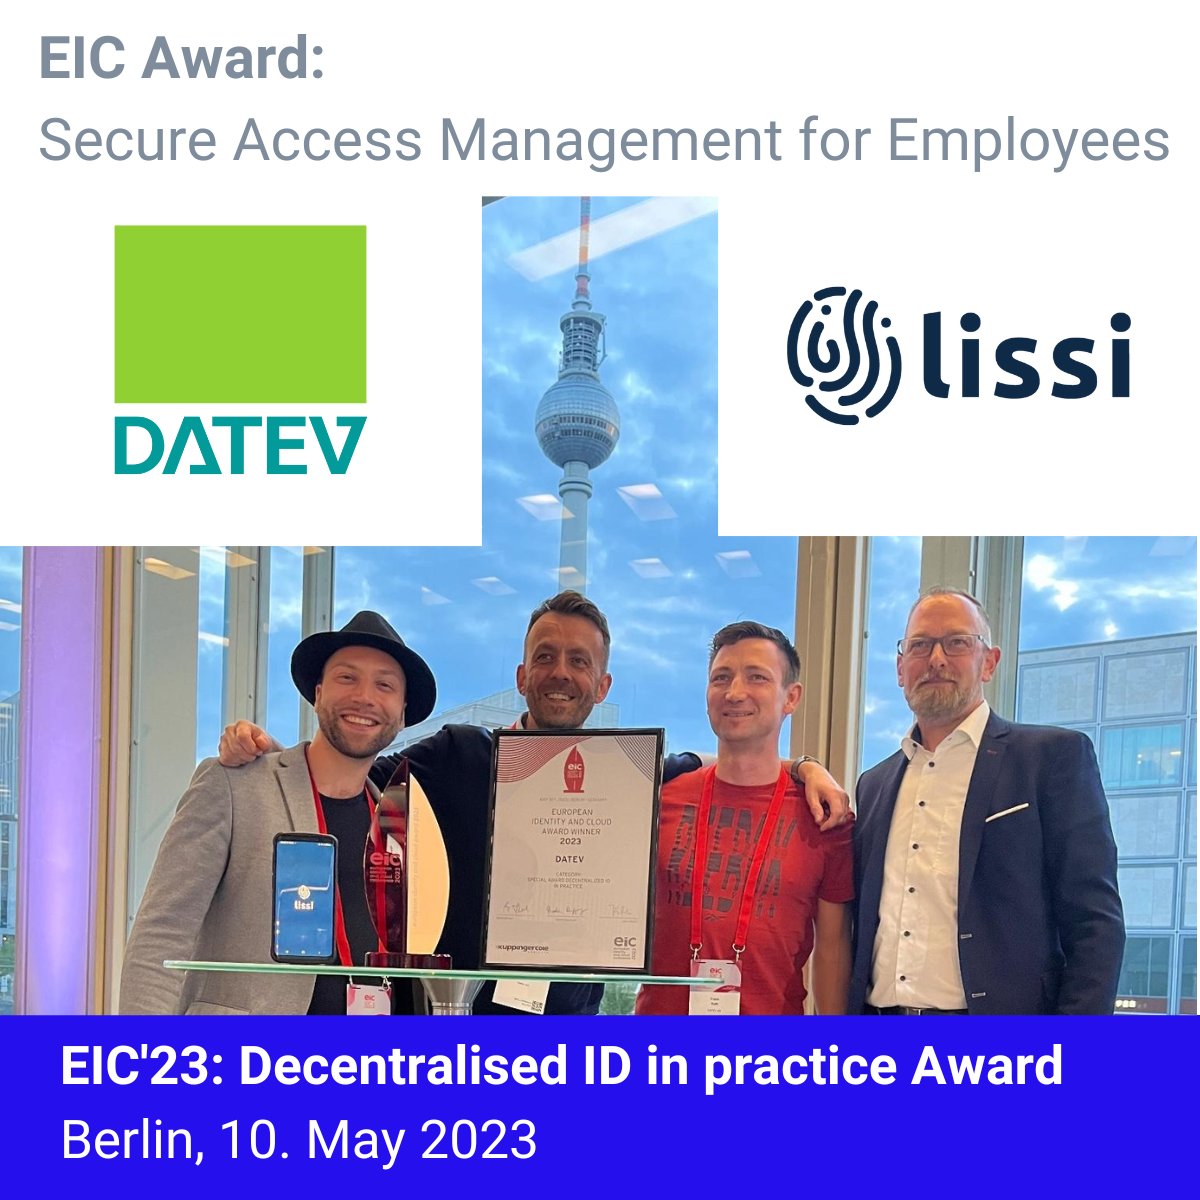 Congratulations to @DATEV and @lissi_id  for winning the #EIC23 award for decentralised #identity in practice using the #IDunion infrastructure! 
They achieved impressive results with up to 25K tests issued per week, 500K verifiable credentials produced & 2.1M savings. Well done!